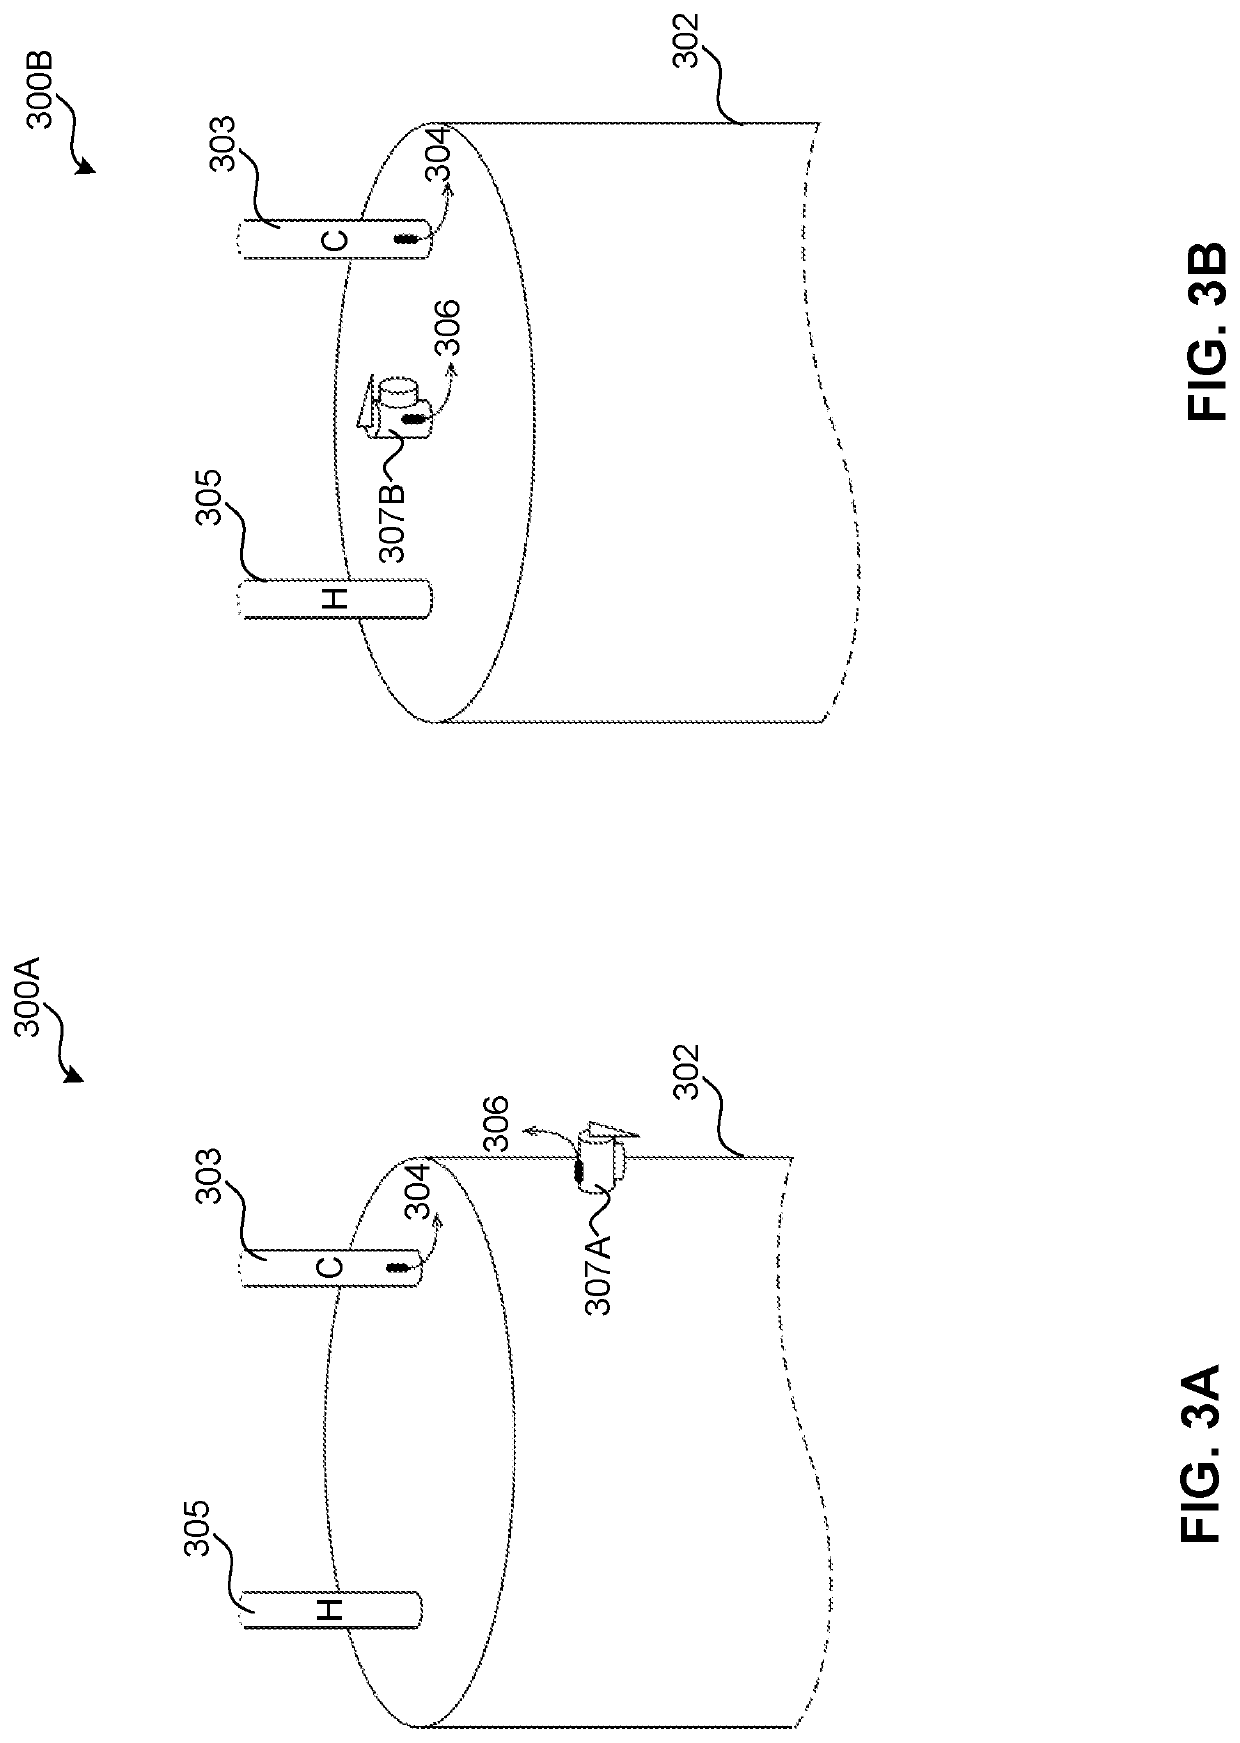 Water heater usage profiling utilizing energy meter and attachable sensors